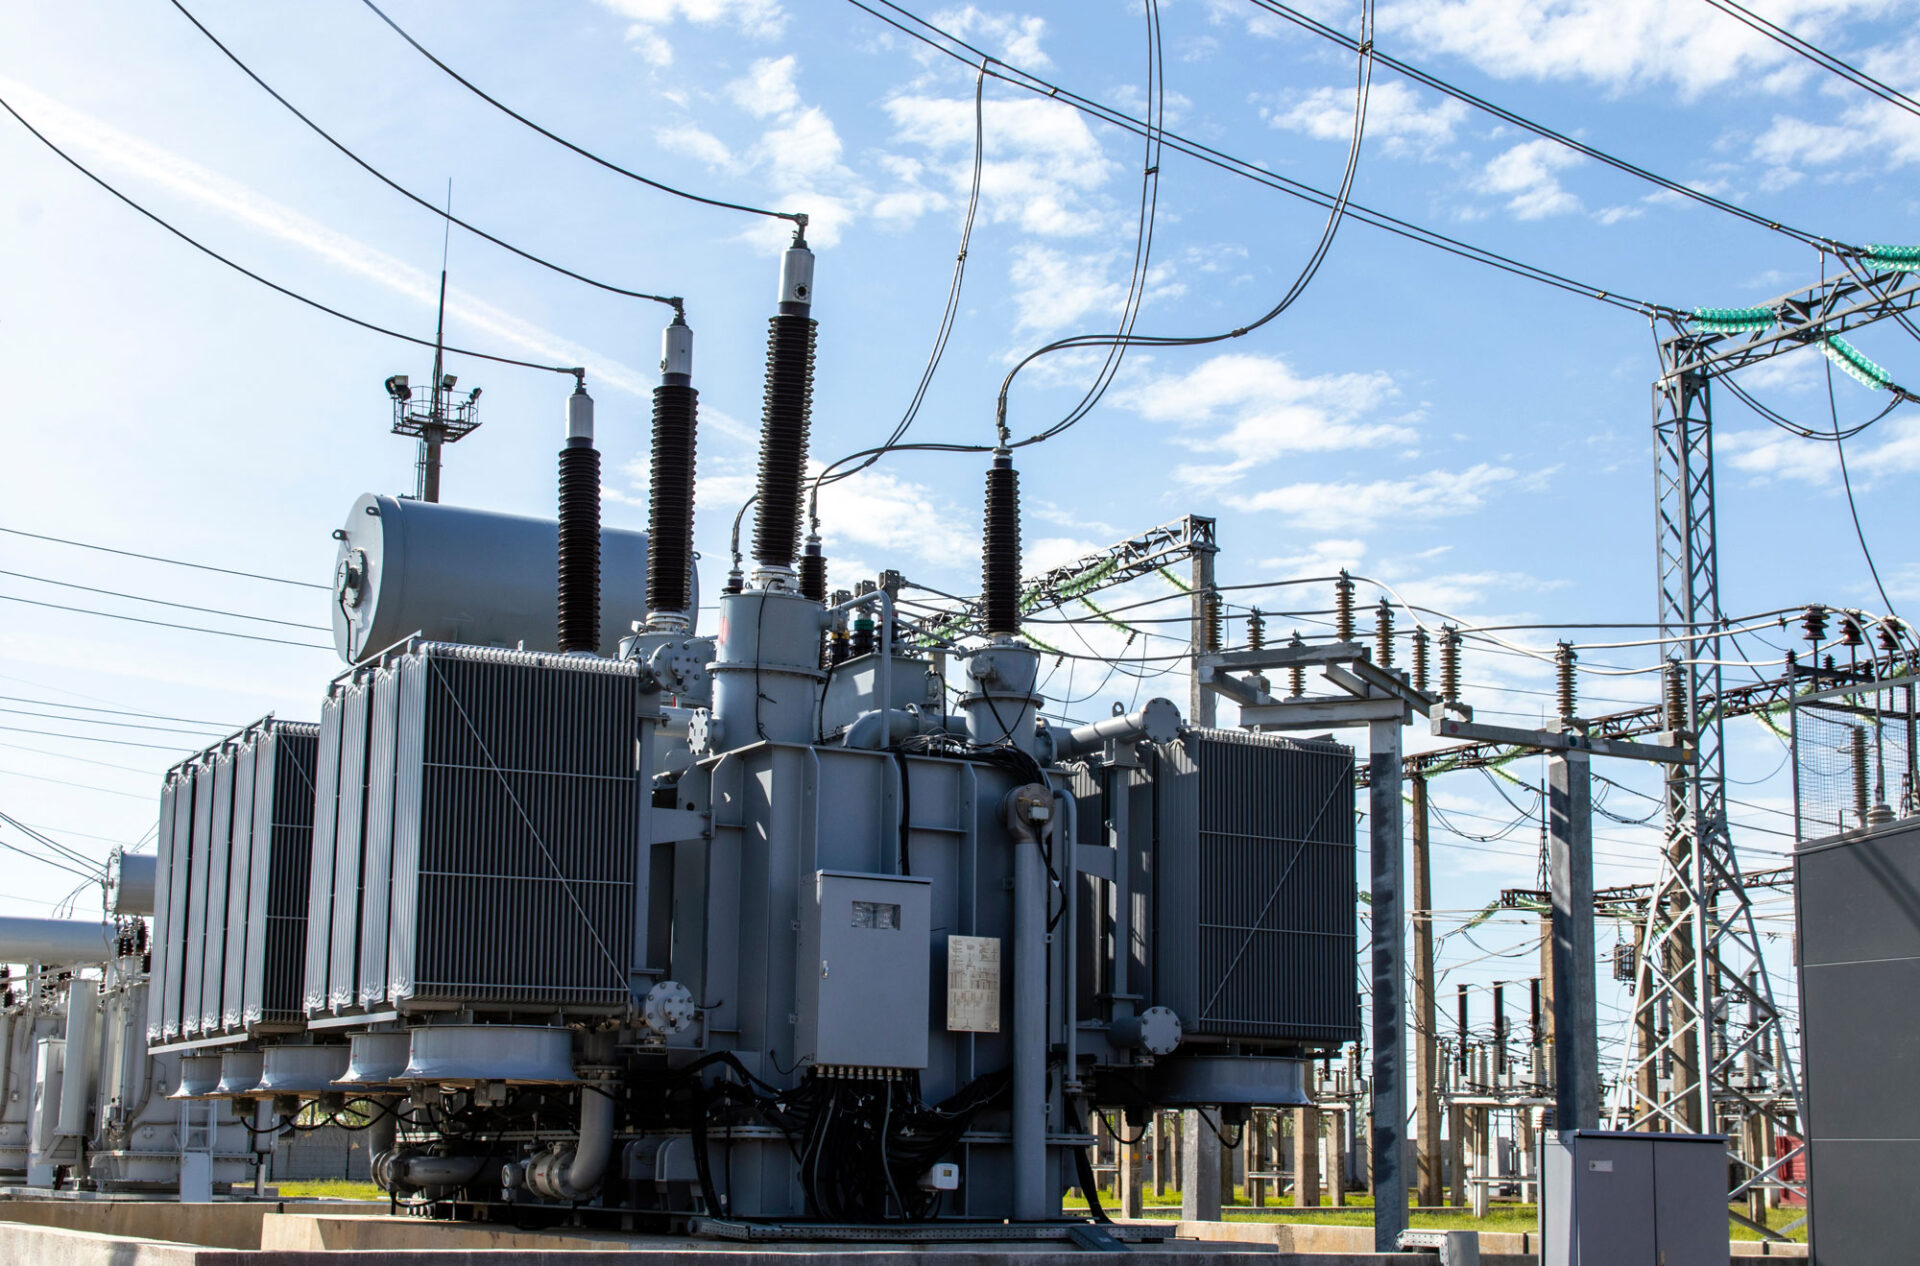 An expansive view of an electrical substation featuring large transformers and intricate high-voltage lines, indicating a complex and well-established power distribution network.